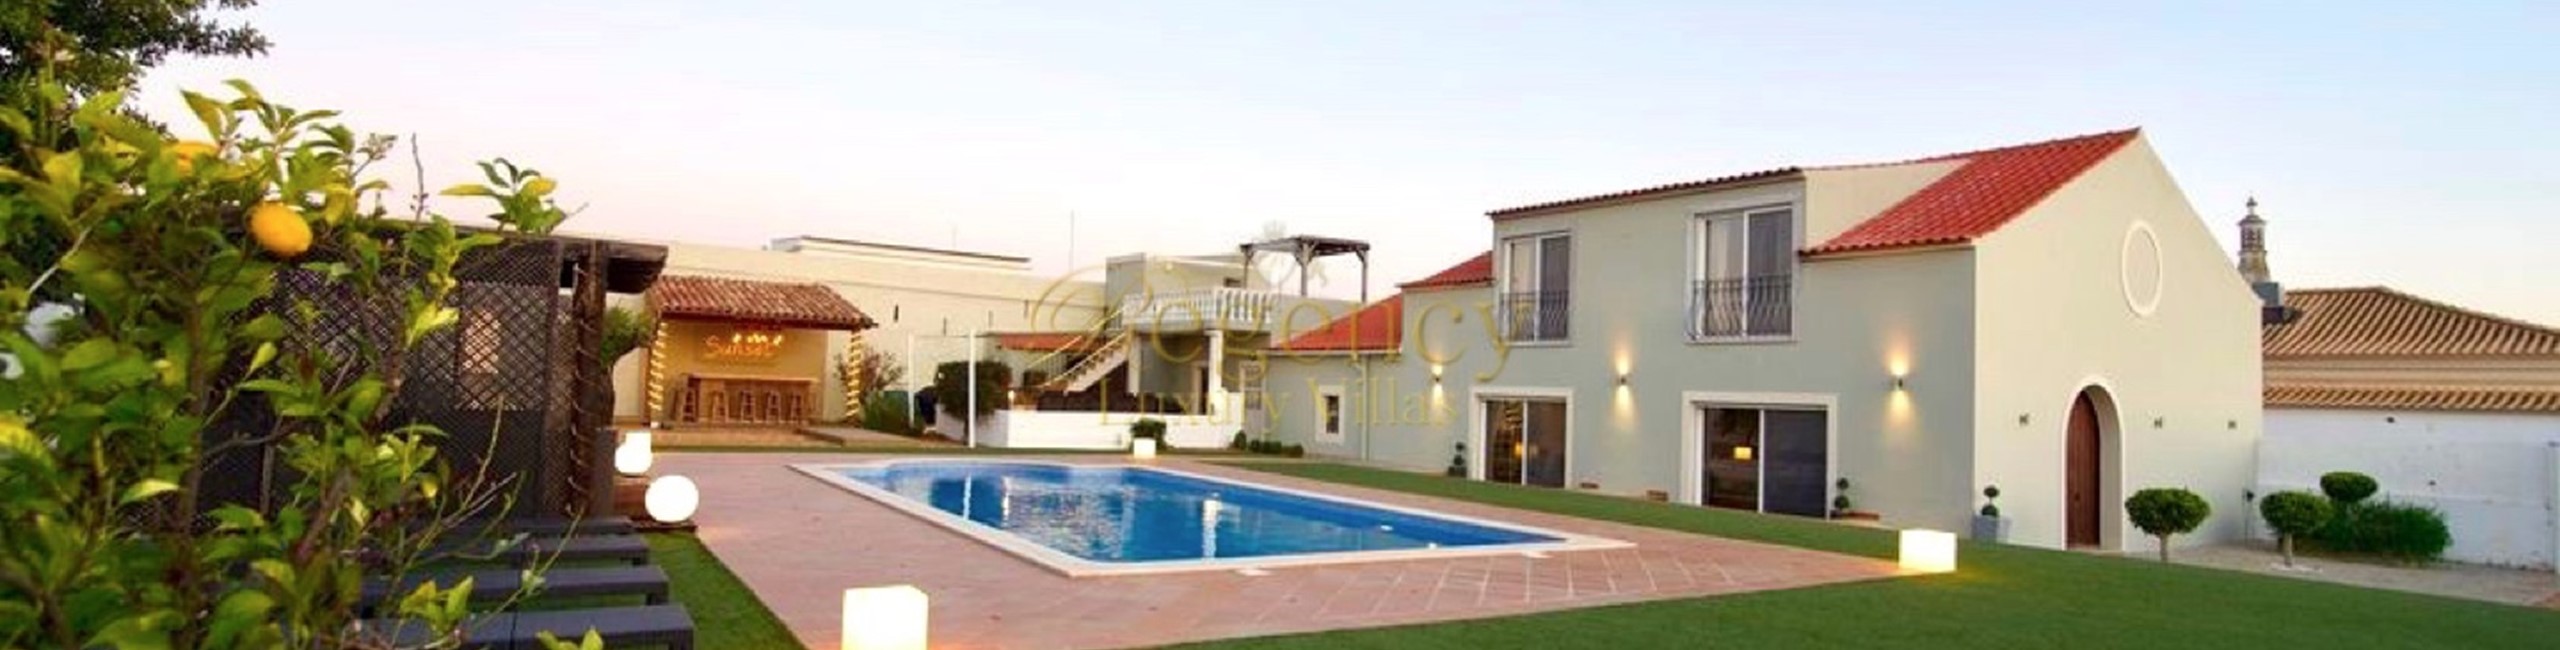 Perfect Holiday Home To Rent 9 Bedrooms